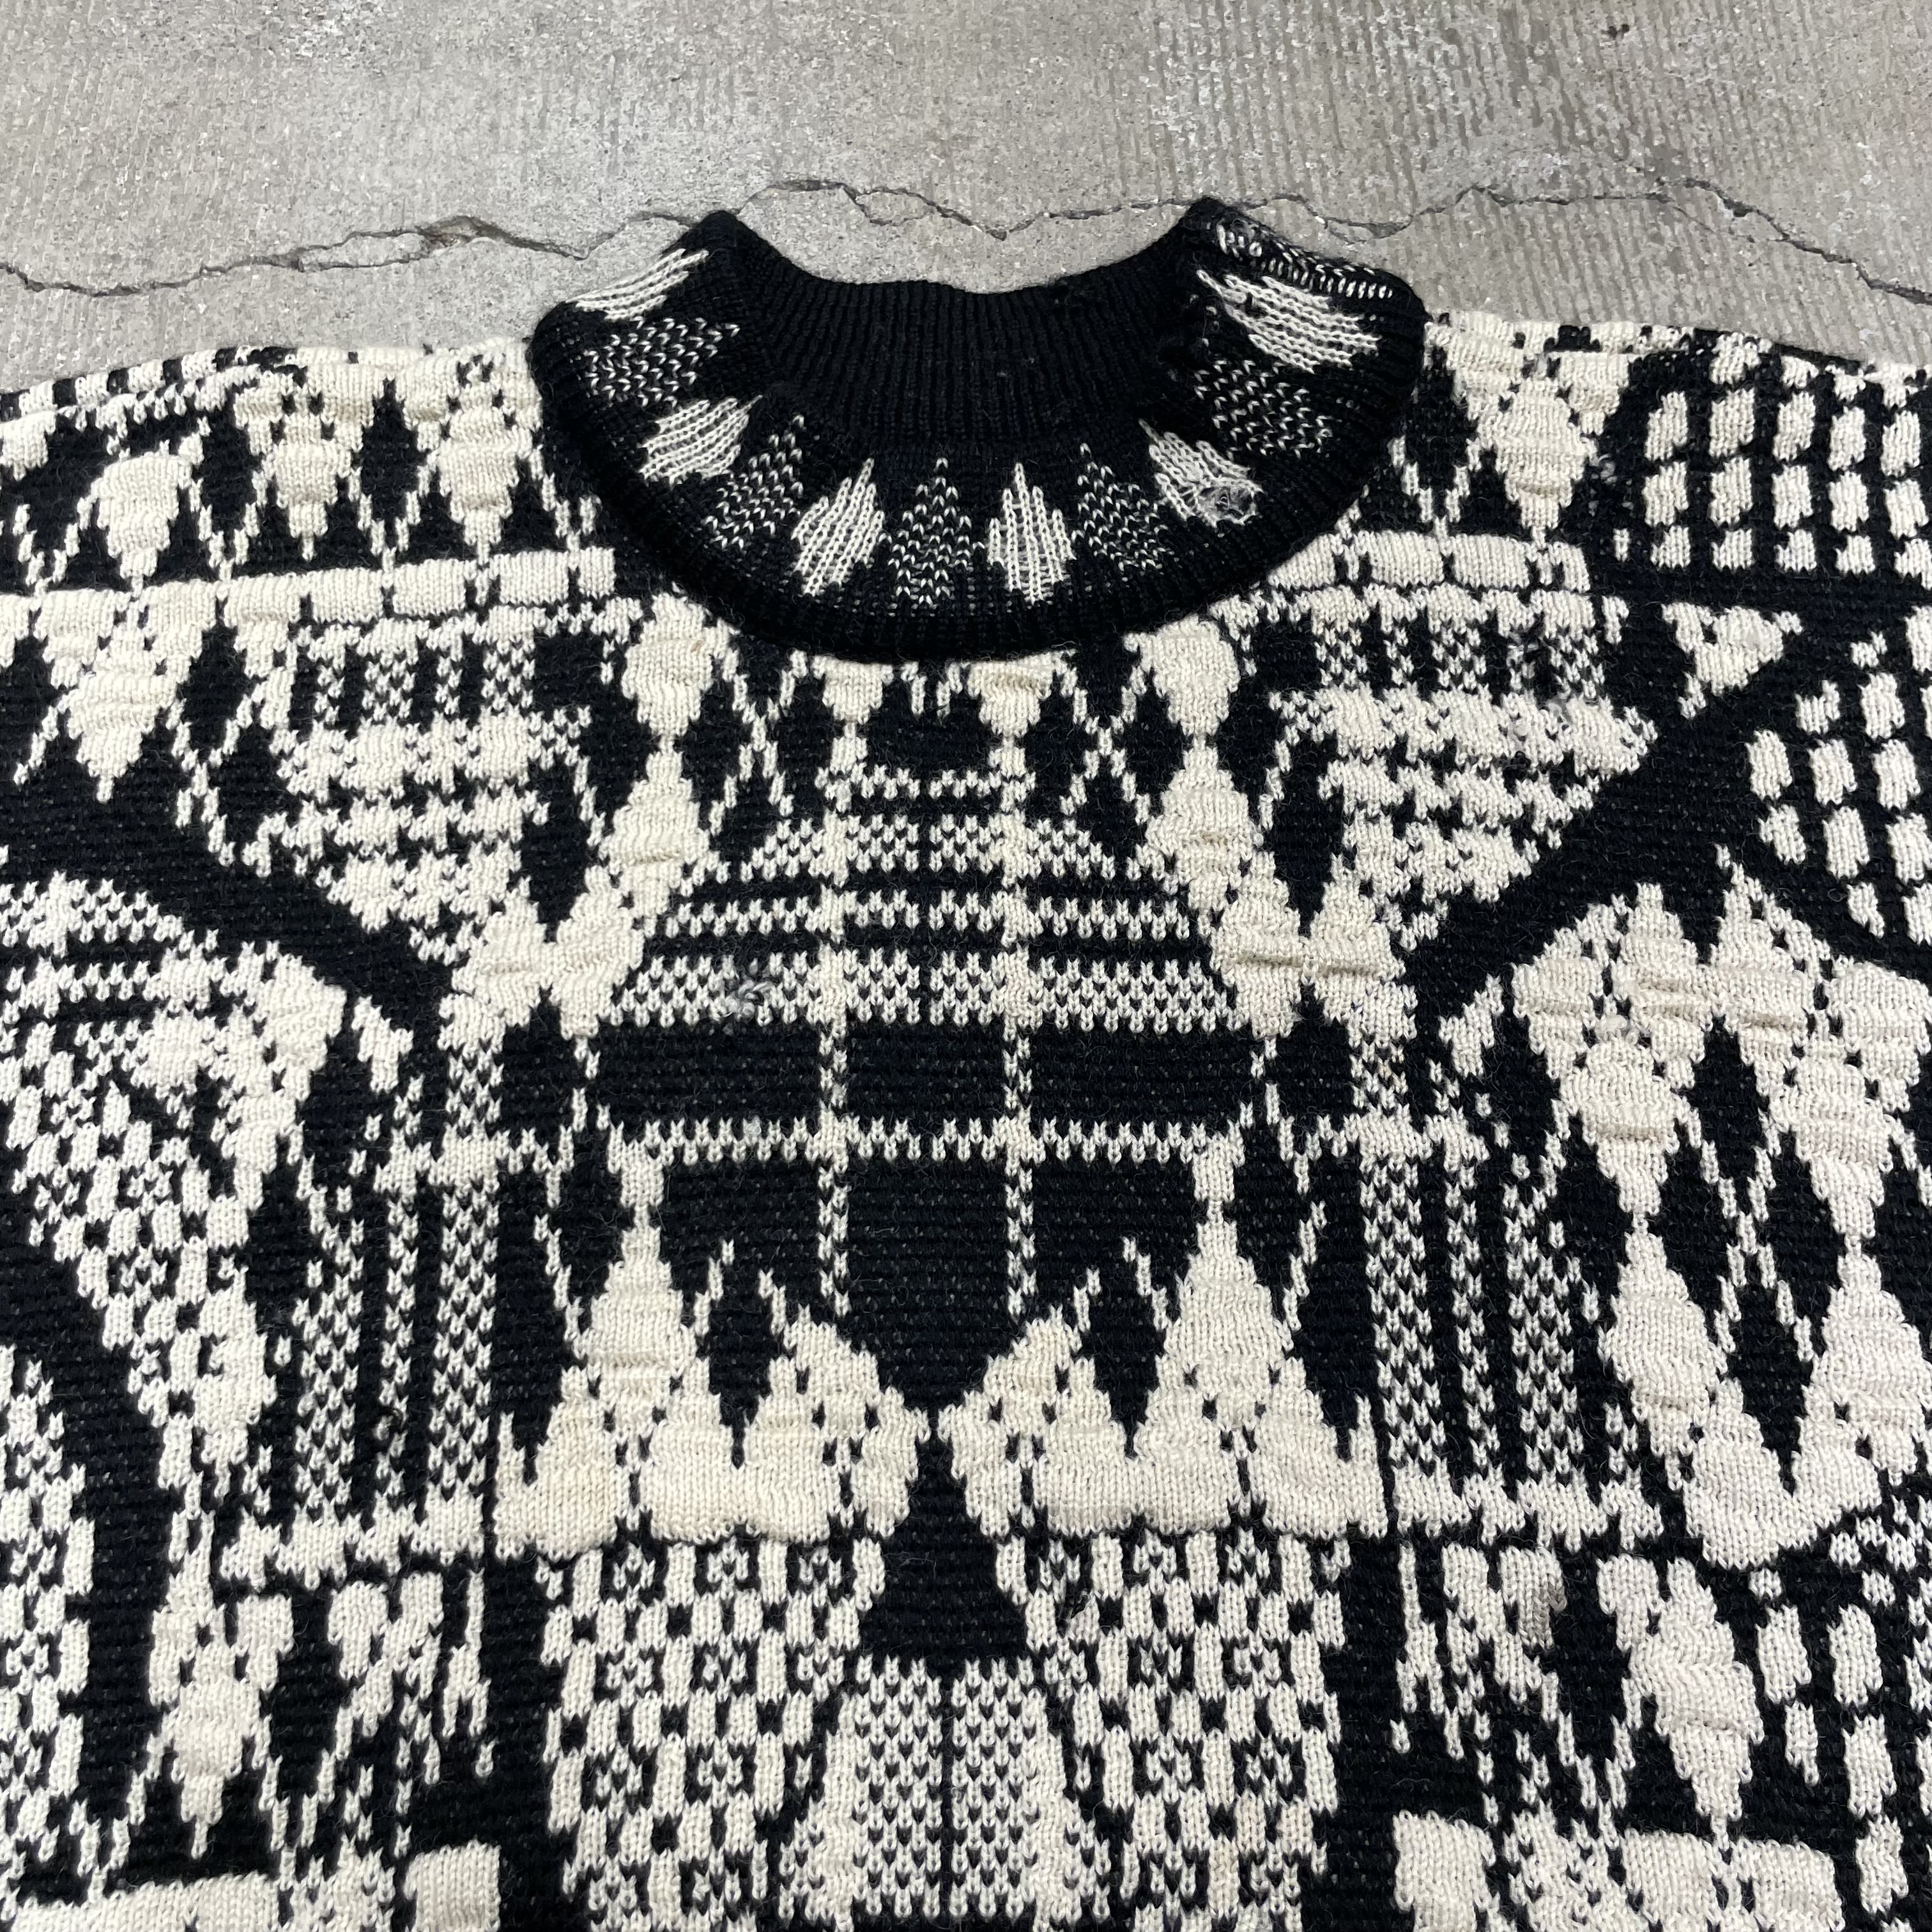 SPECIAL!!! COOGI 3D KNIT CRAYZY PATTERN!! 「モノトーン、Ｌ 